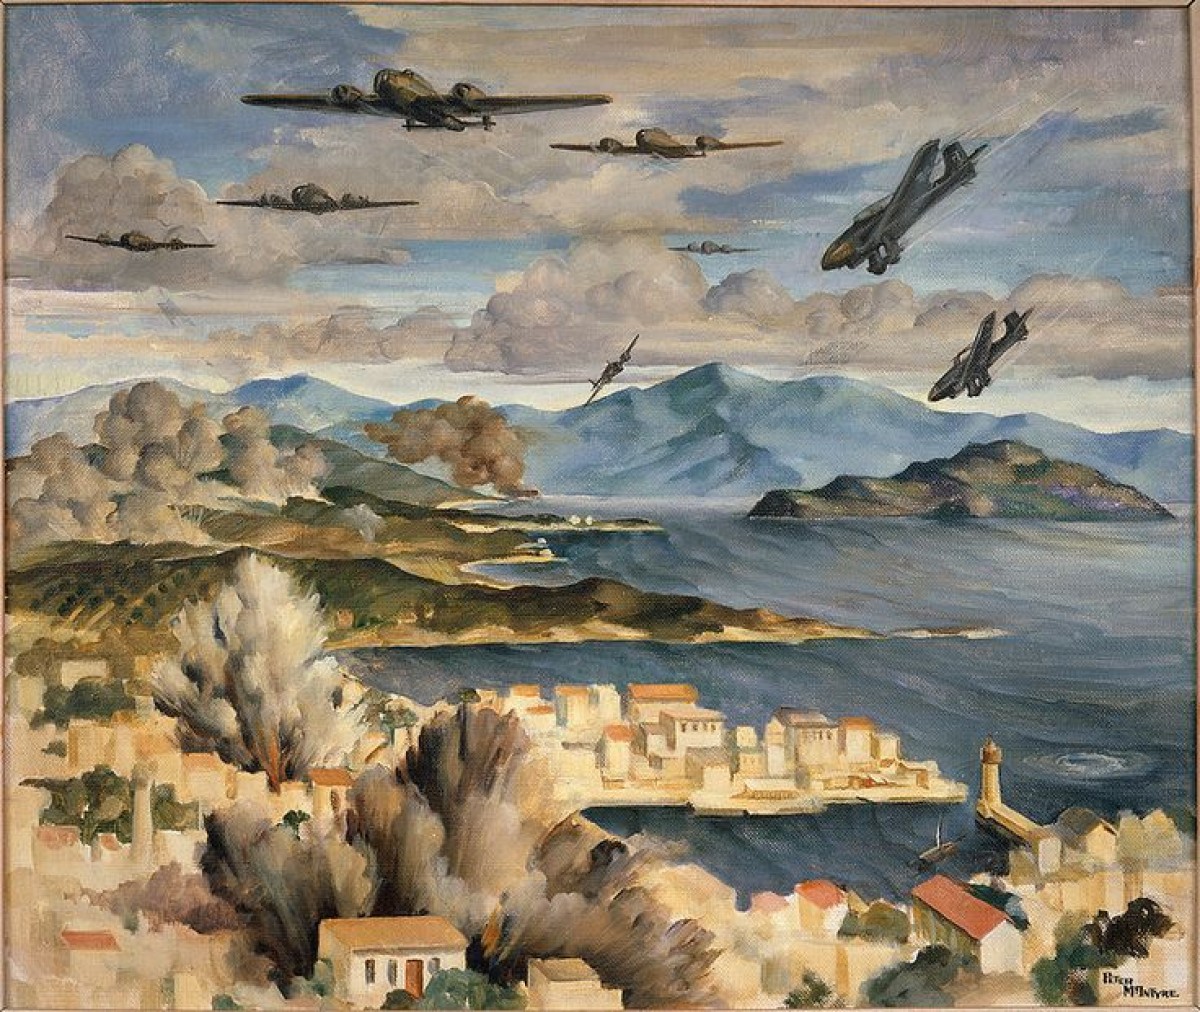 Peter McIntyre, The Blitz, Canea Crete area defended by NZ'ers, May 1941